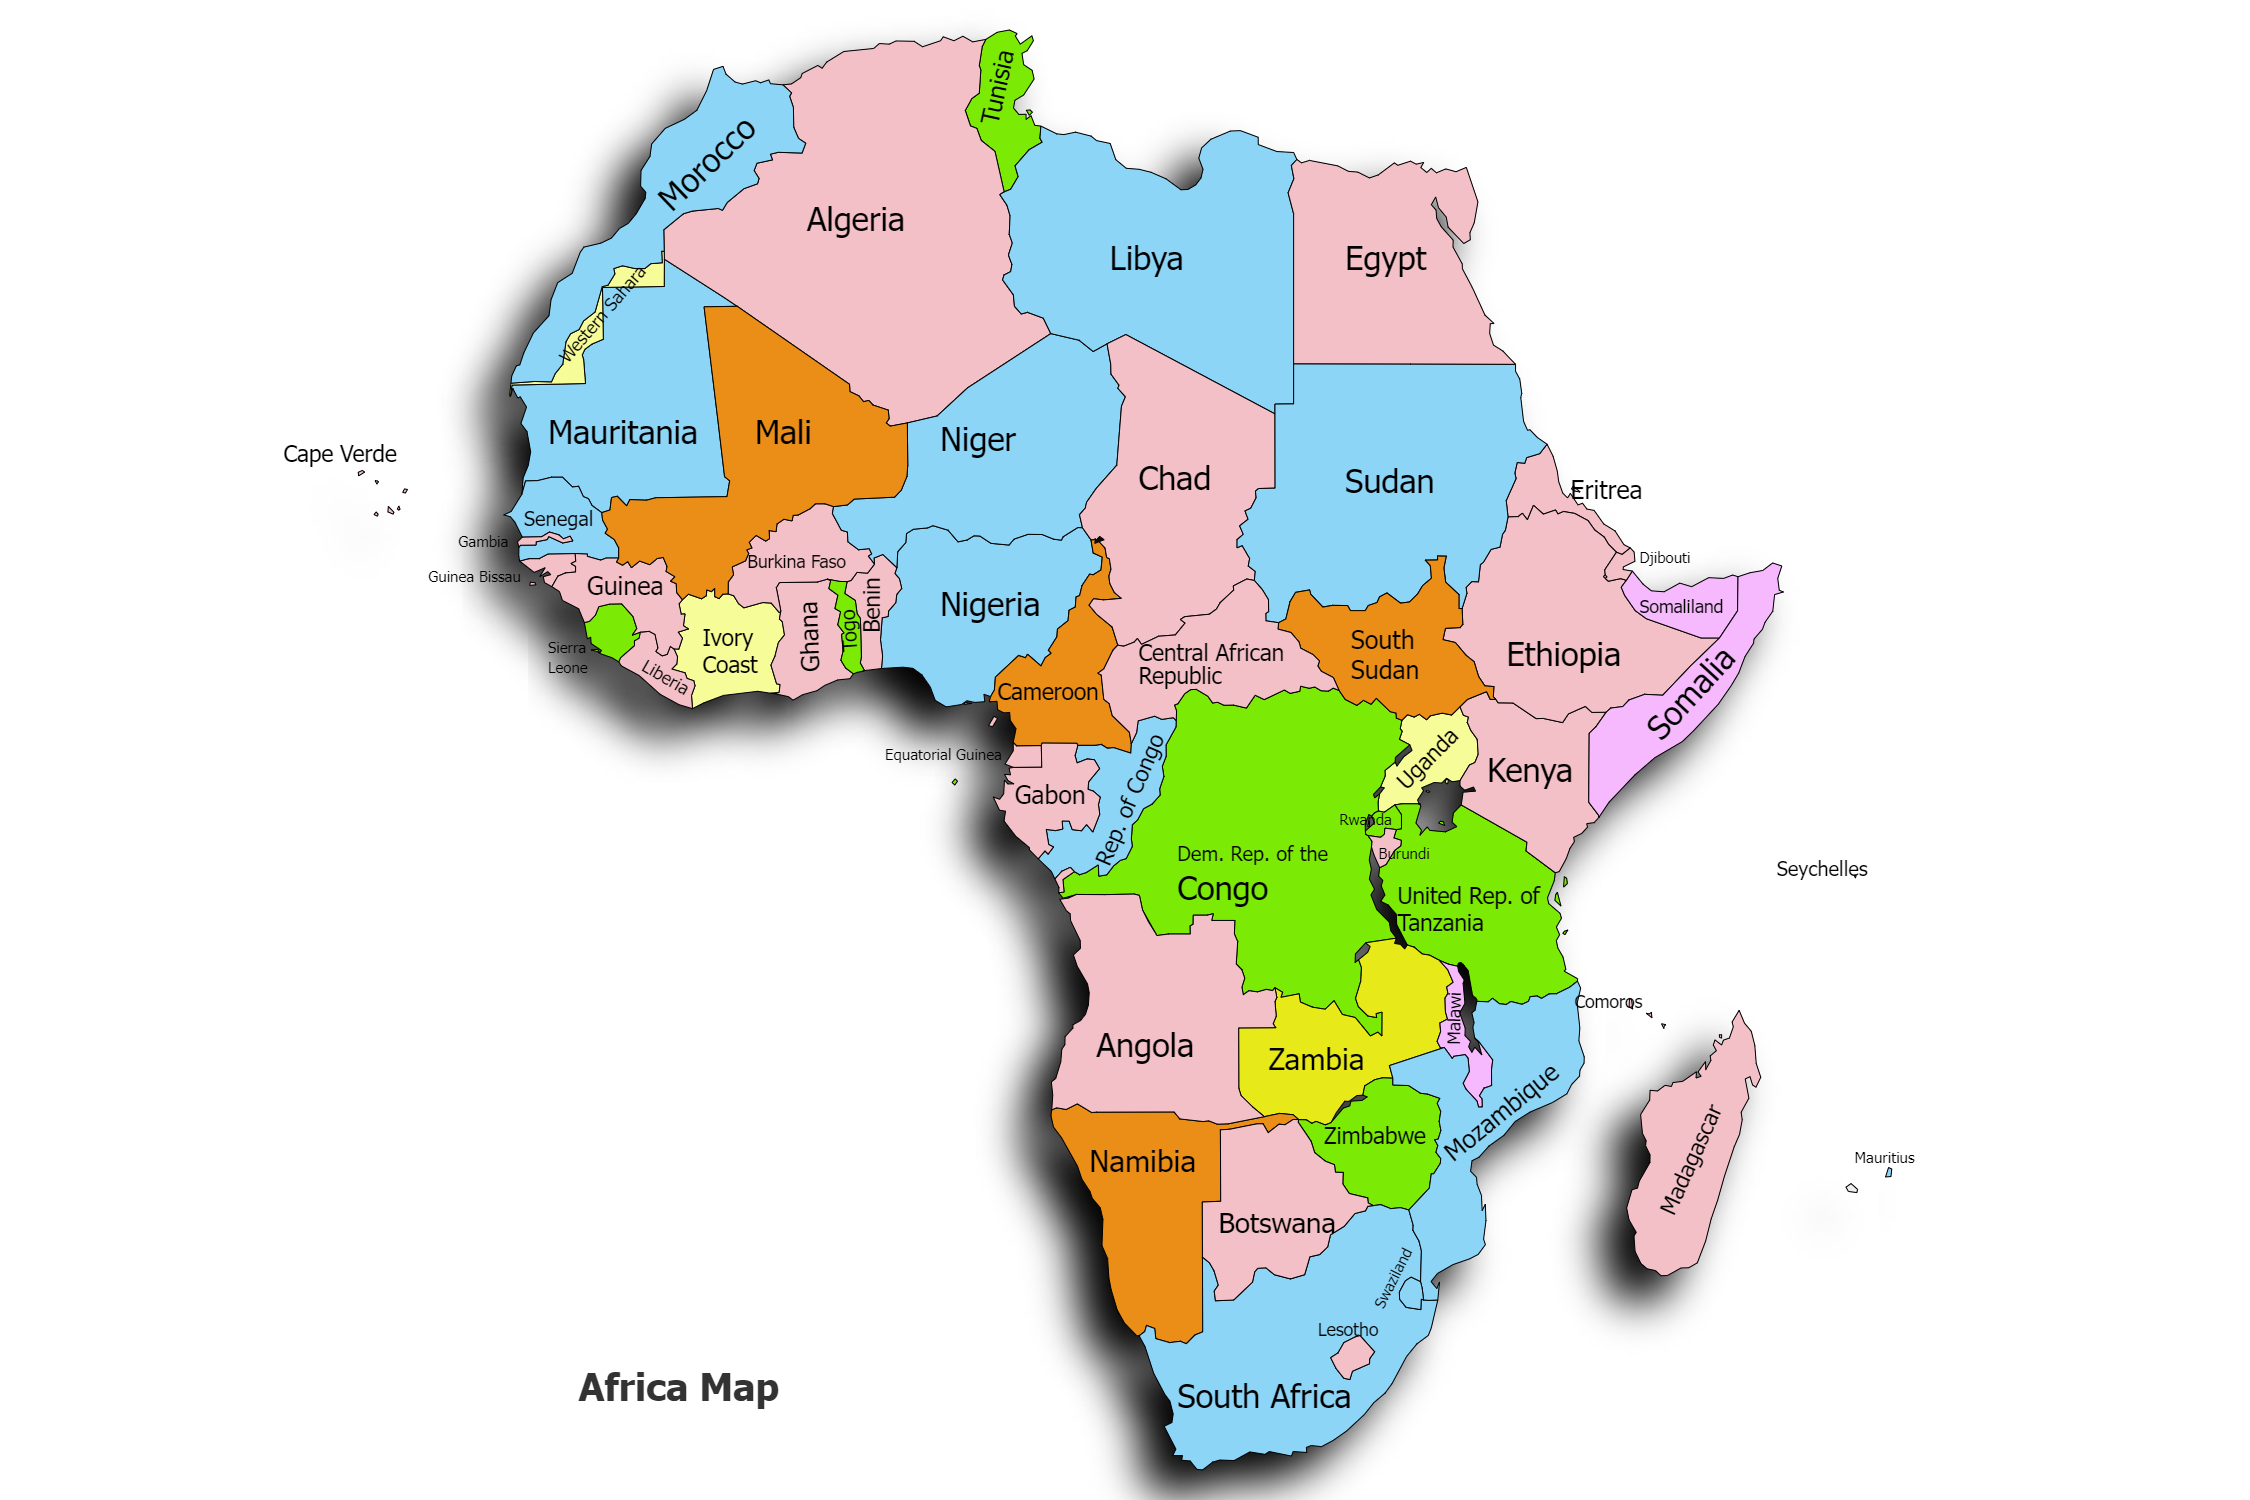 Introduction to Introduction to worlds second largest continent Africa